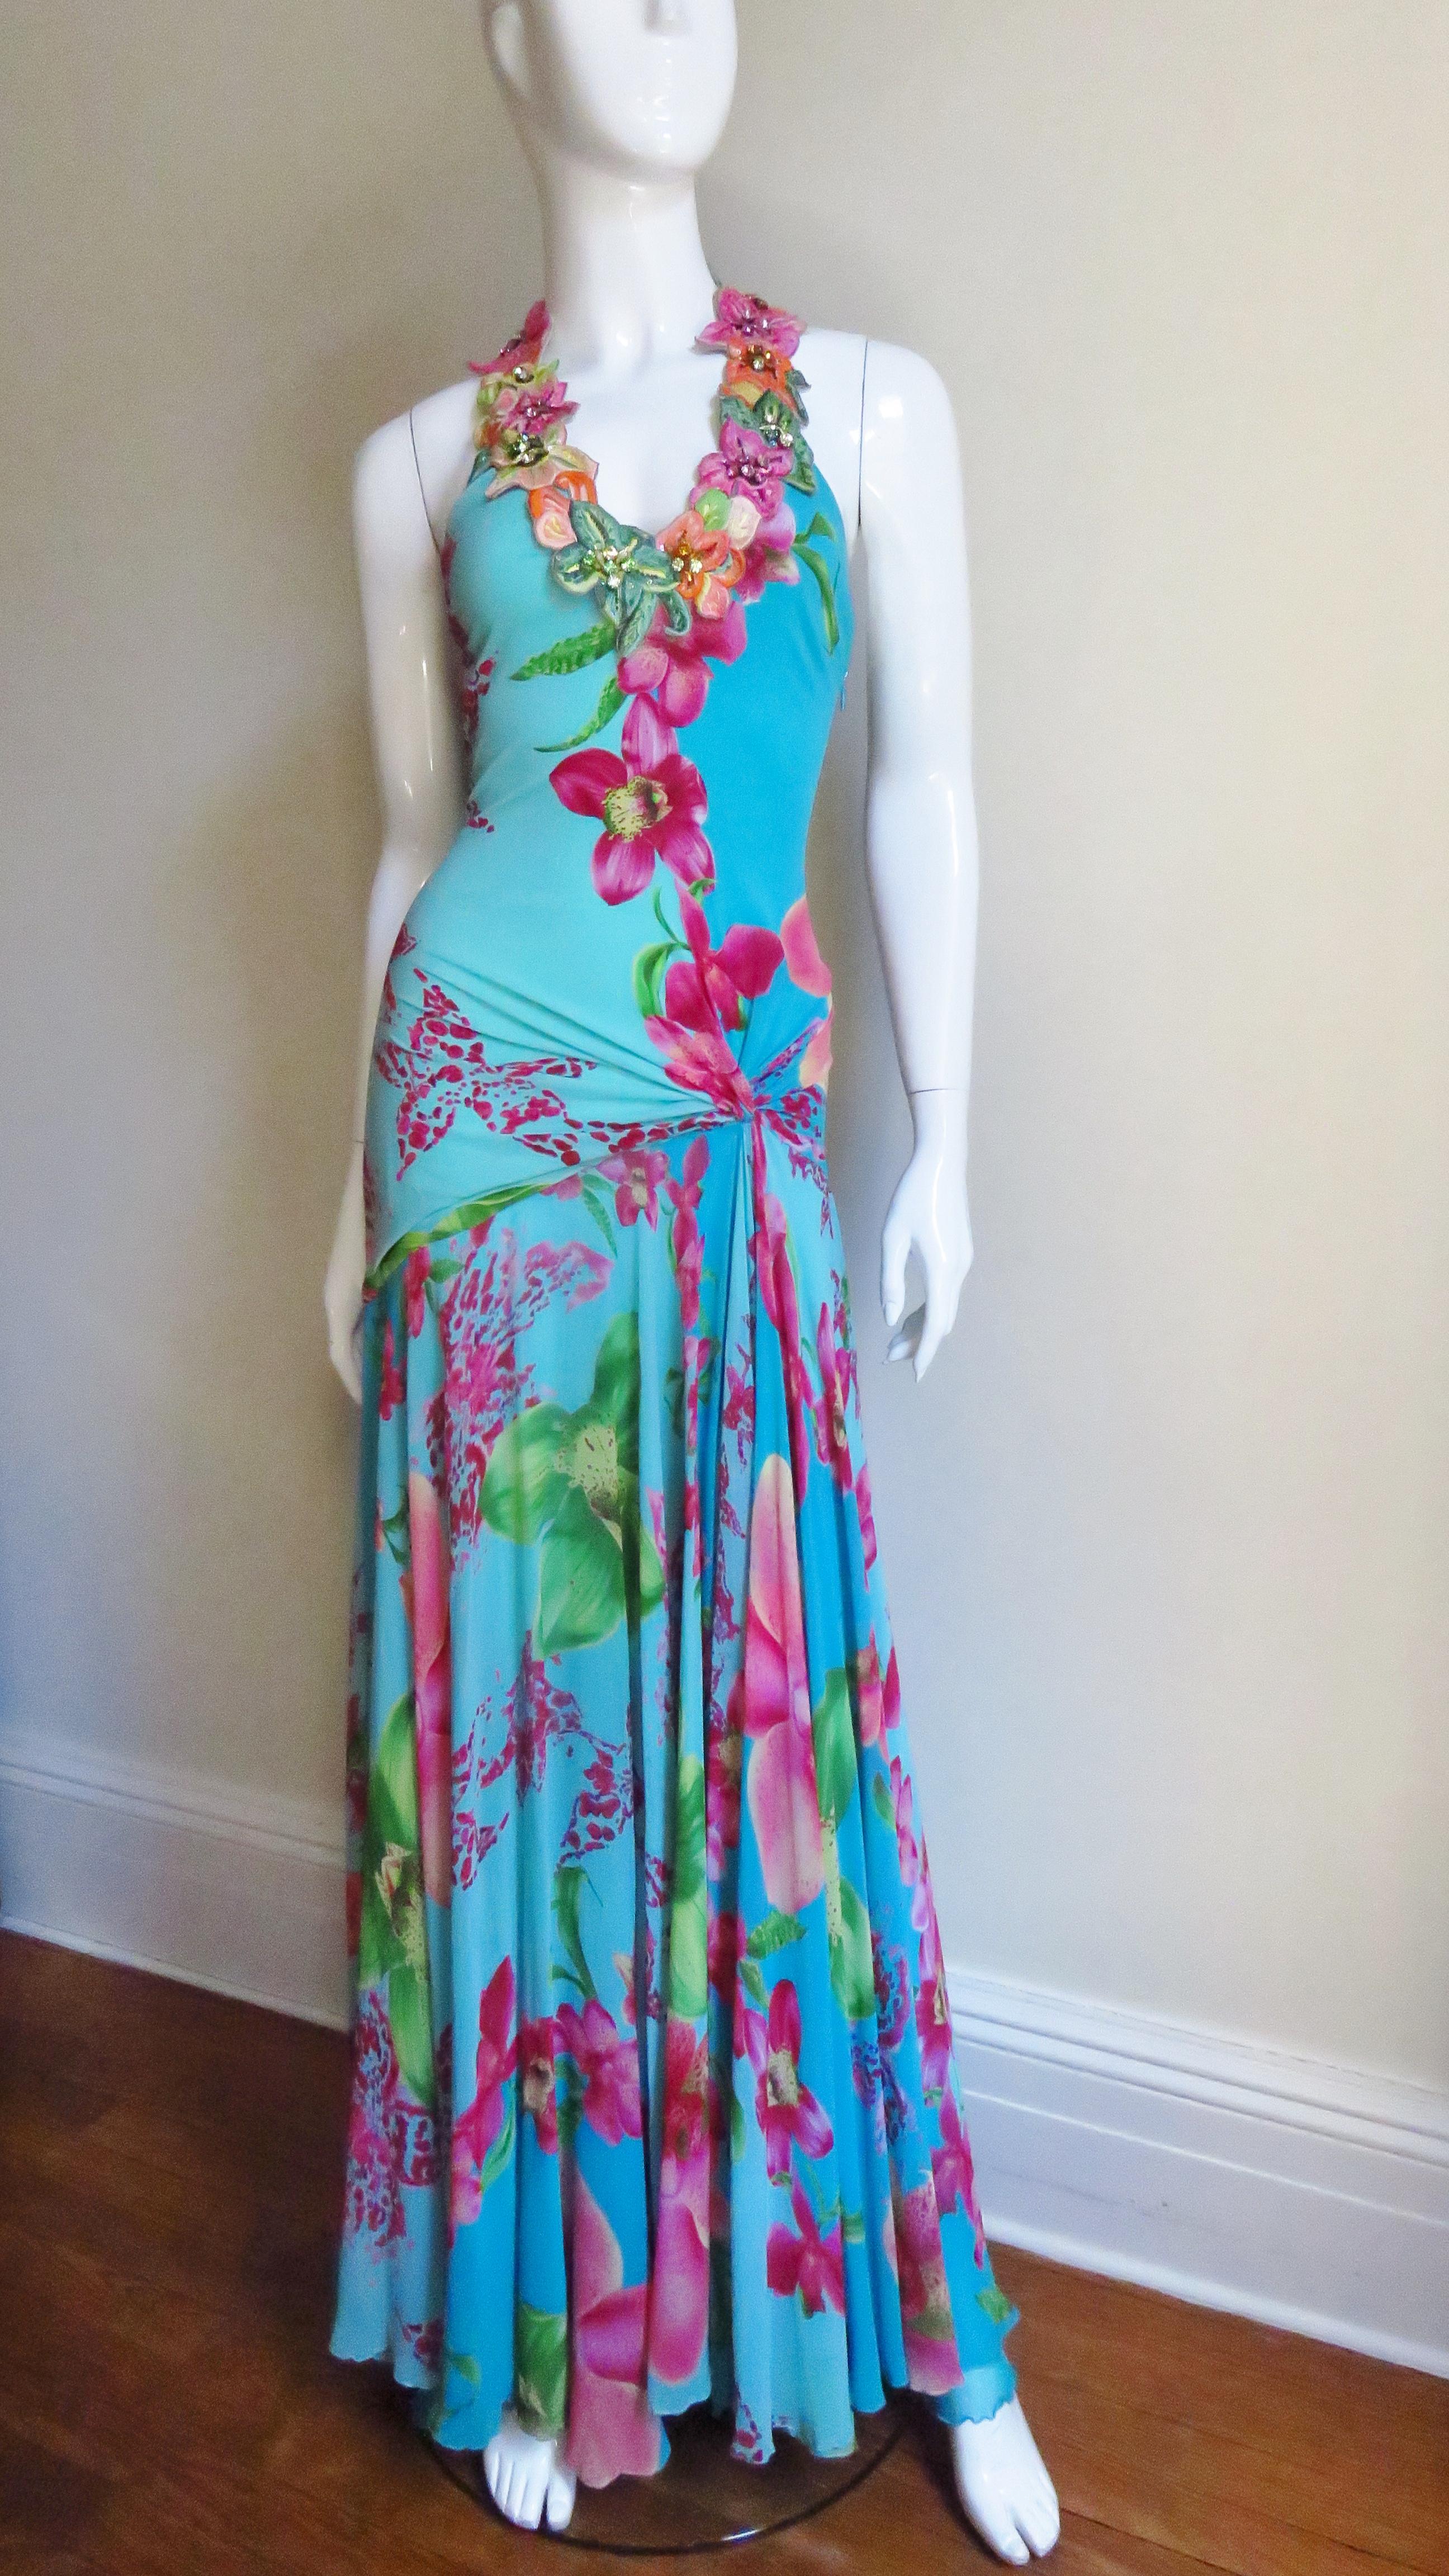 A gorgeous turquoise blue silk jersey and silk chiffon dress from Versace in a pink and green flower pattern.  It has a plunging neckline framed with intricately embroidered flowers highlighted in their centers with several colorful rhinestones and